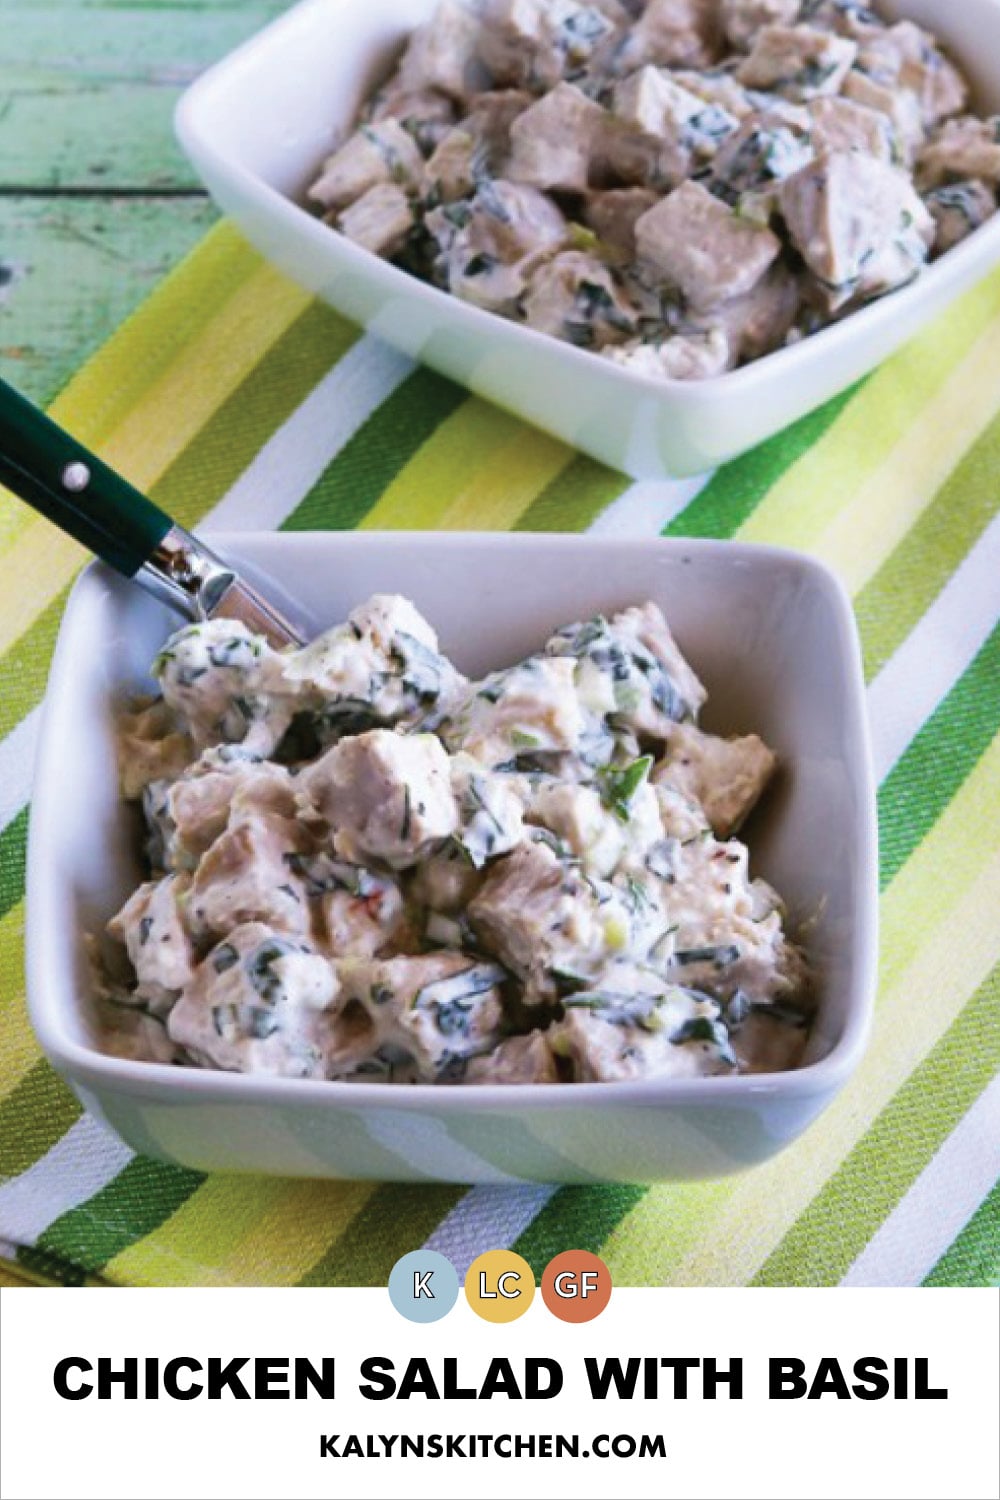 Pinterest image of Chicken Salad with Basil